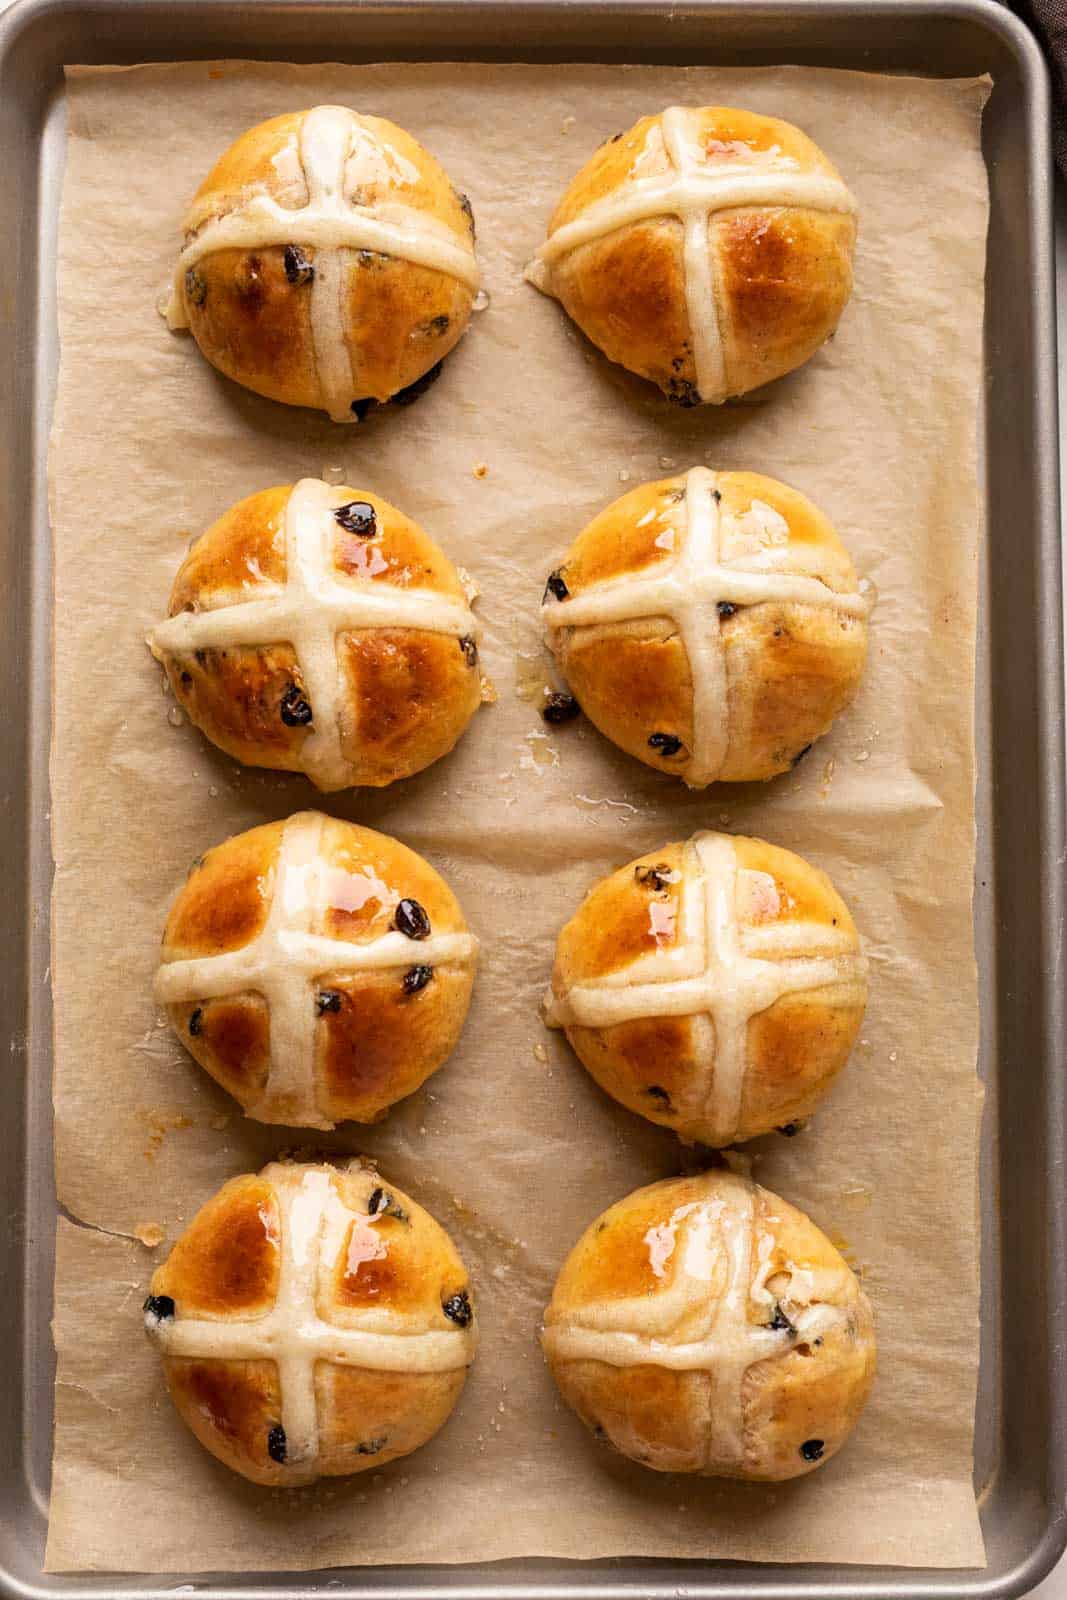 8 Hot Cross Buns on parchment paper on a baking sheet straight from the oven